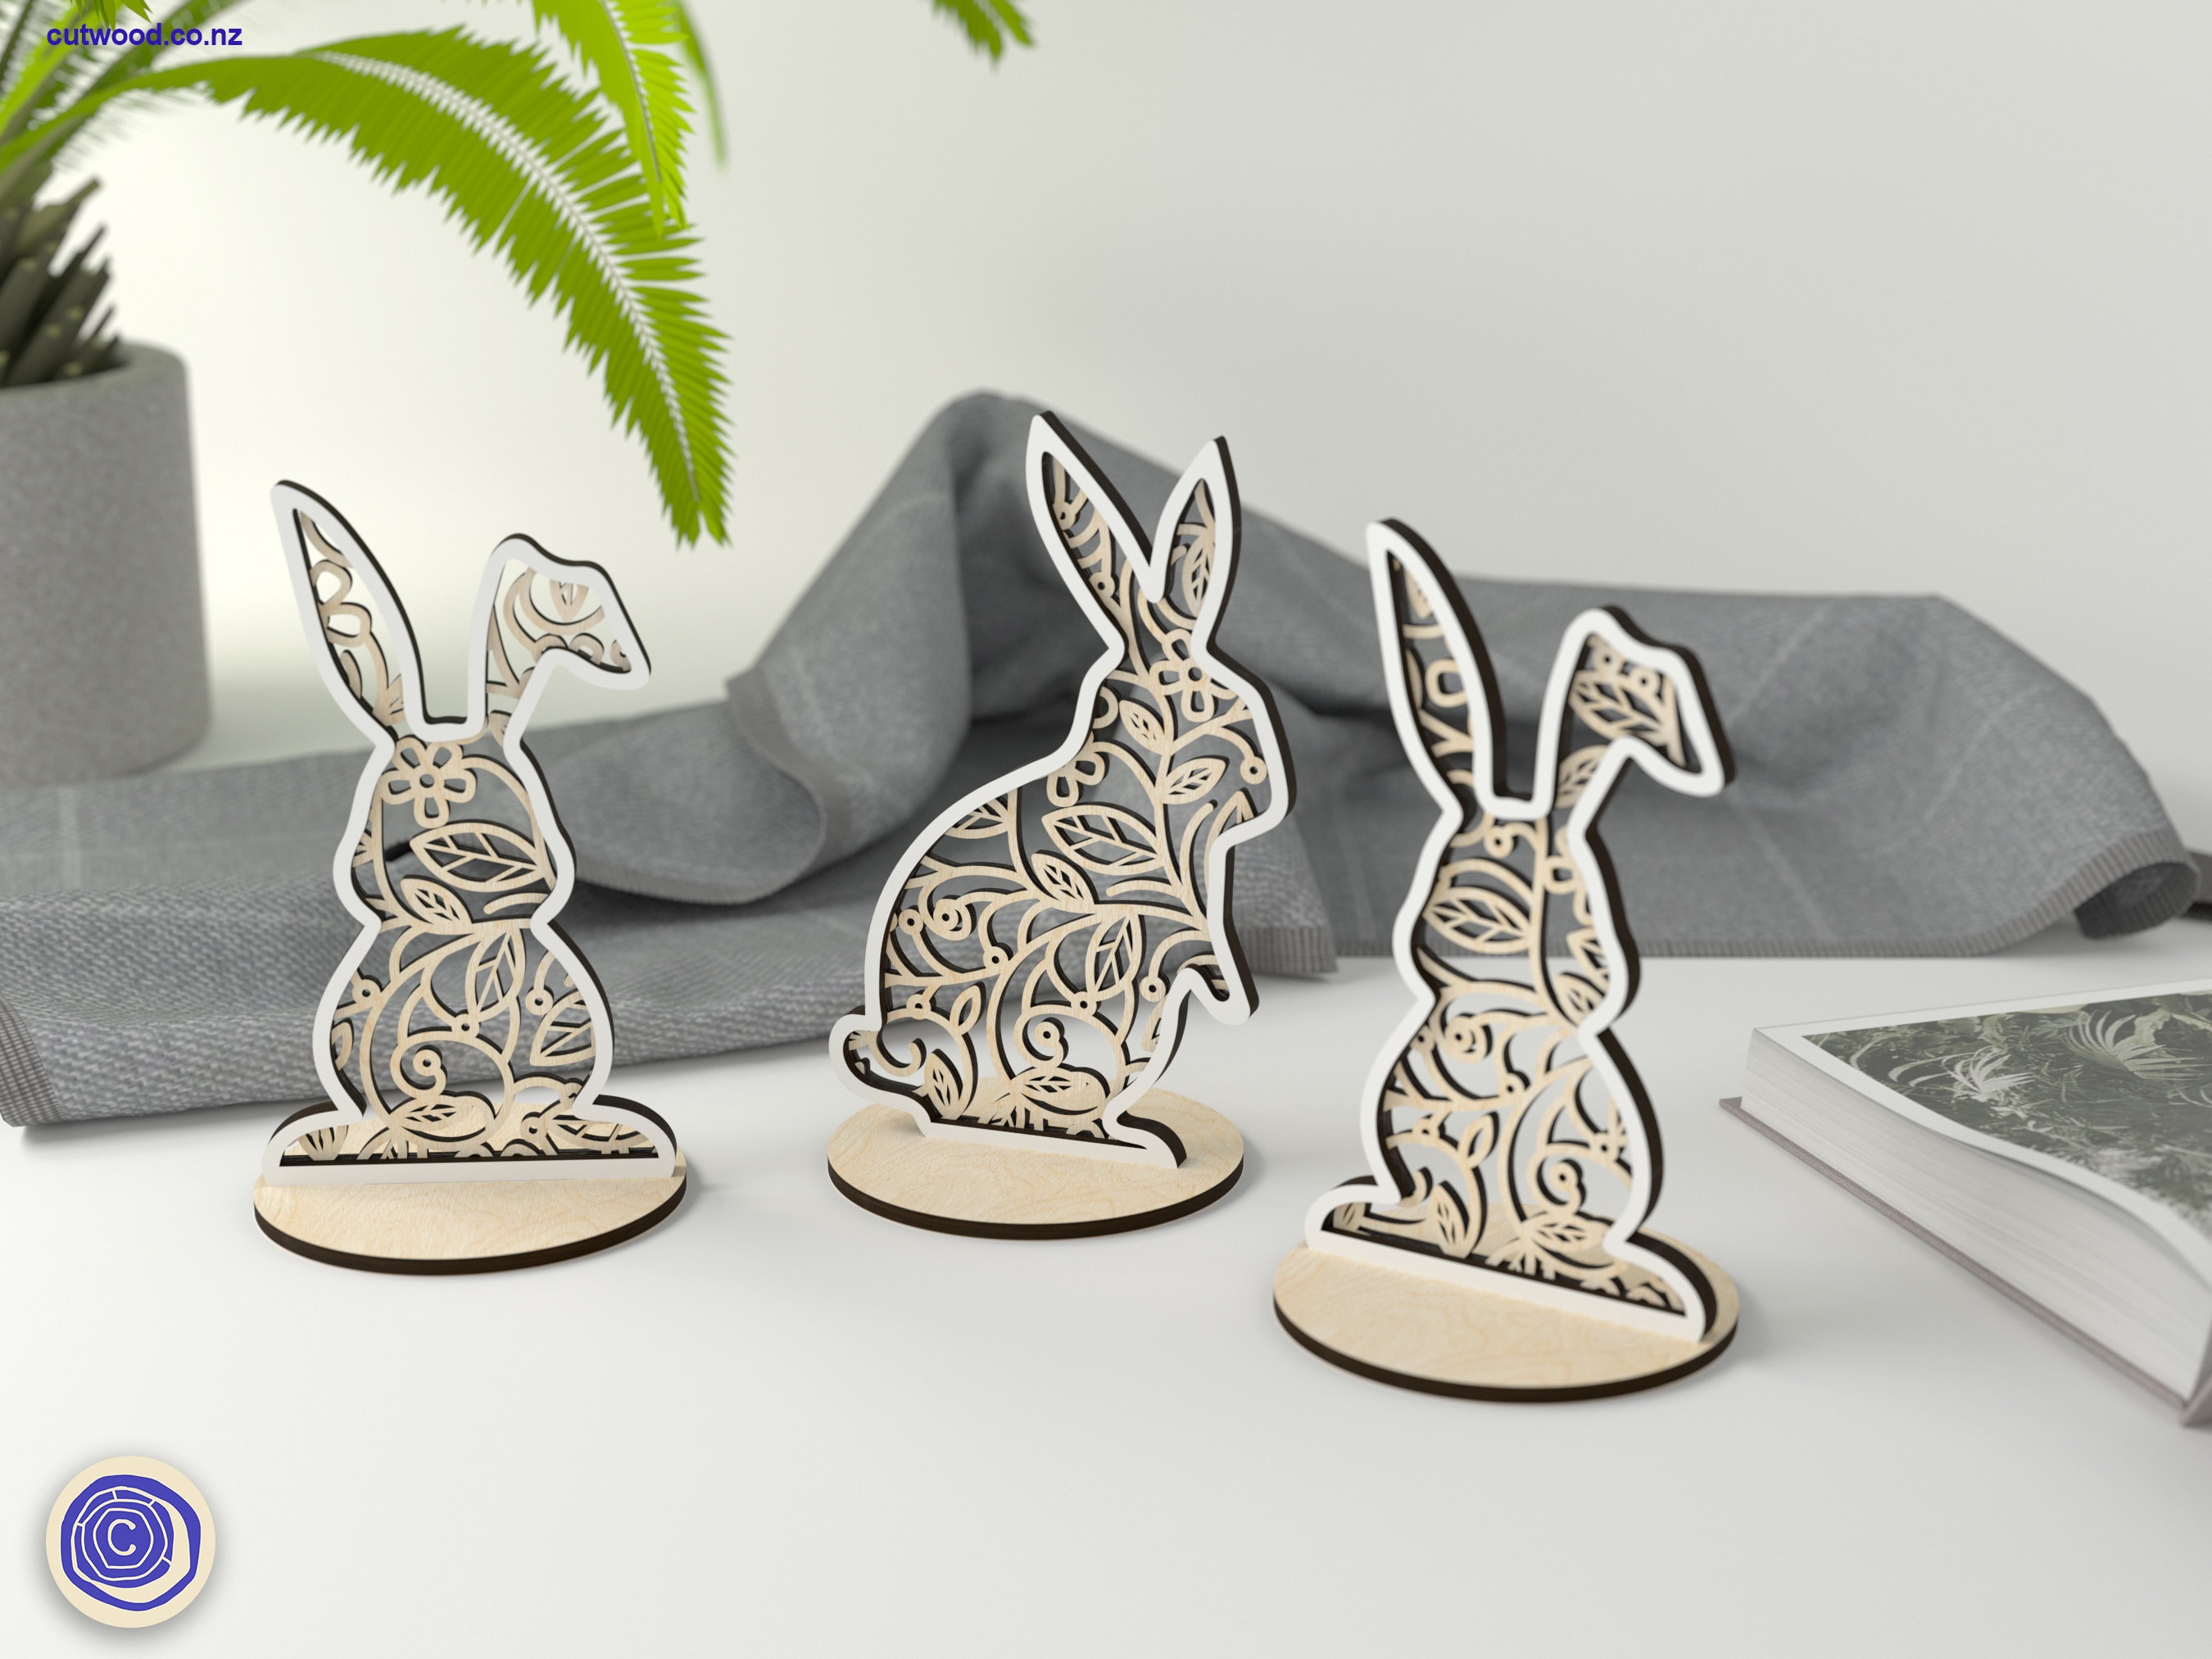 CNC Laser Wood Cut Table Lamp SquareShape Easter Bunny Pattern 3D Paper  Wooden Laser Cutting Sculpture Photoreal Intricate Enchanting Beautiful and  Whimsical · Creative Fabrica